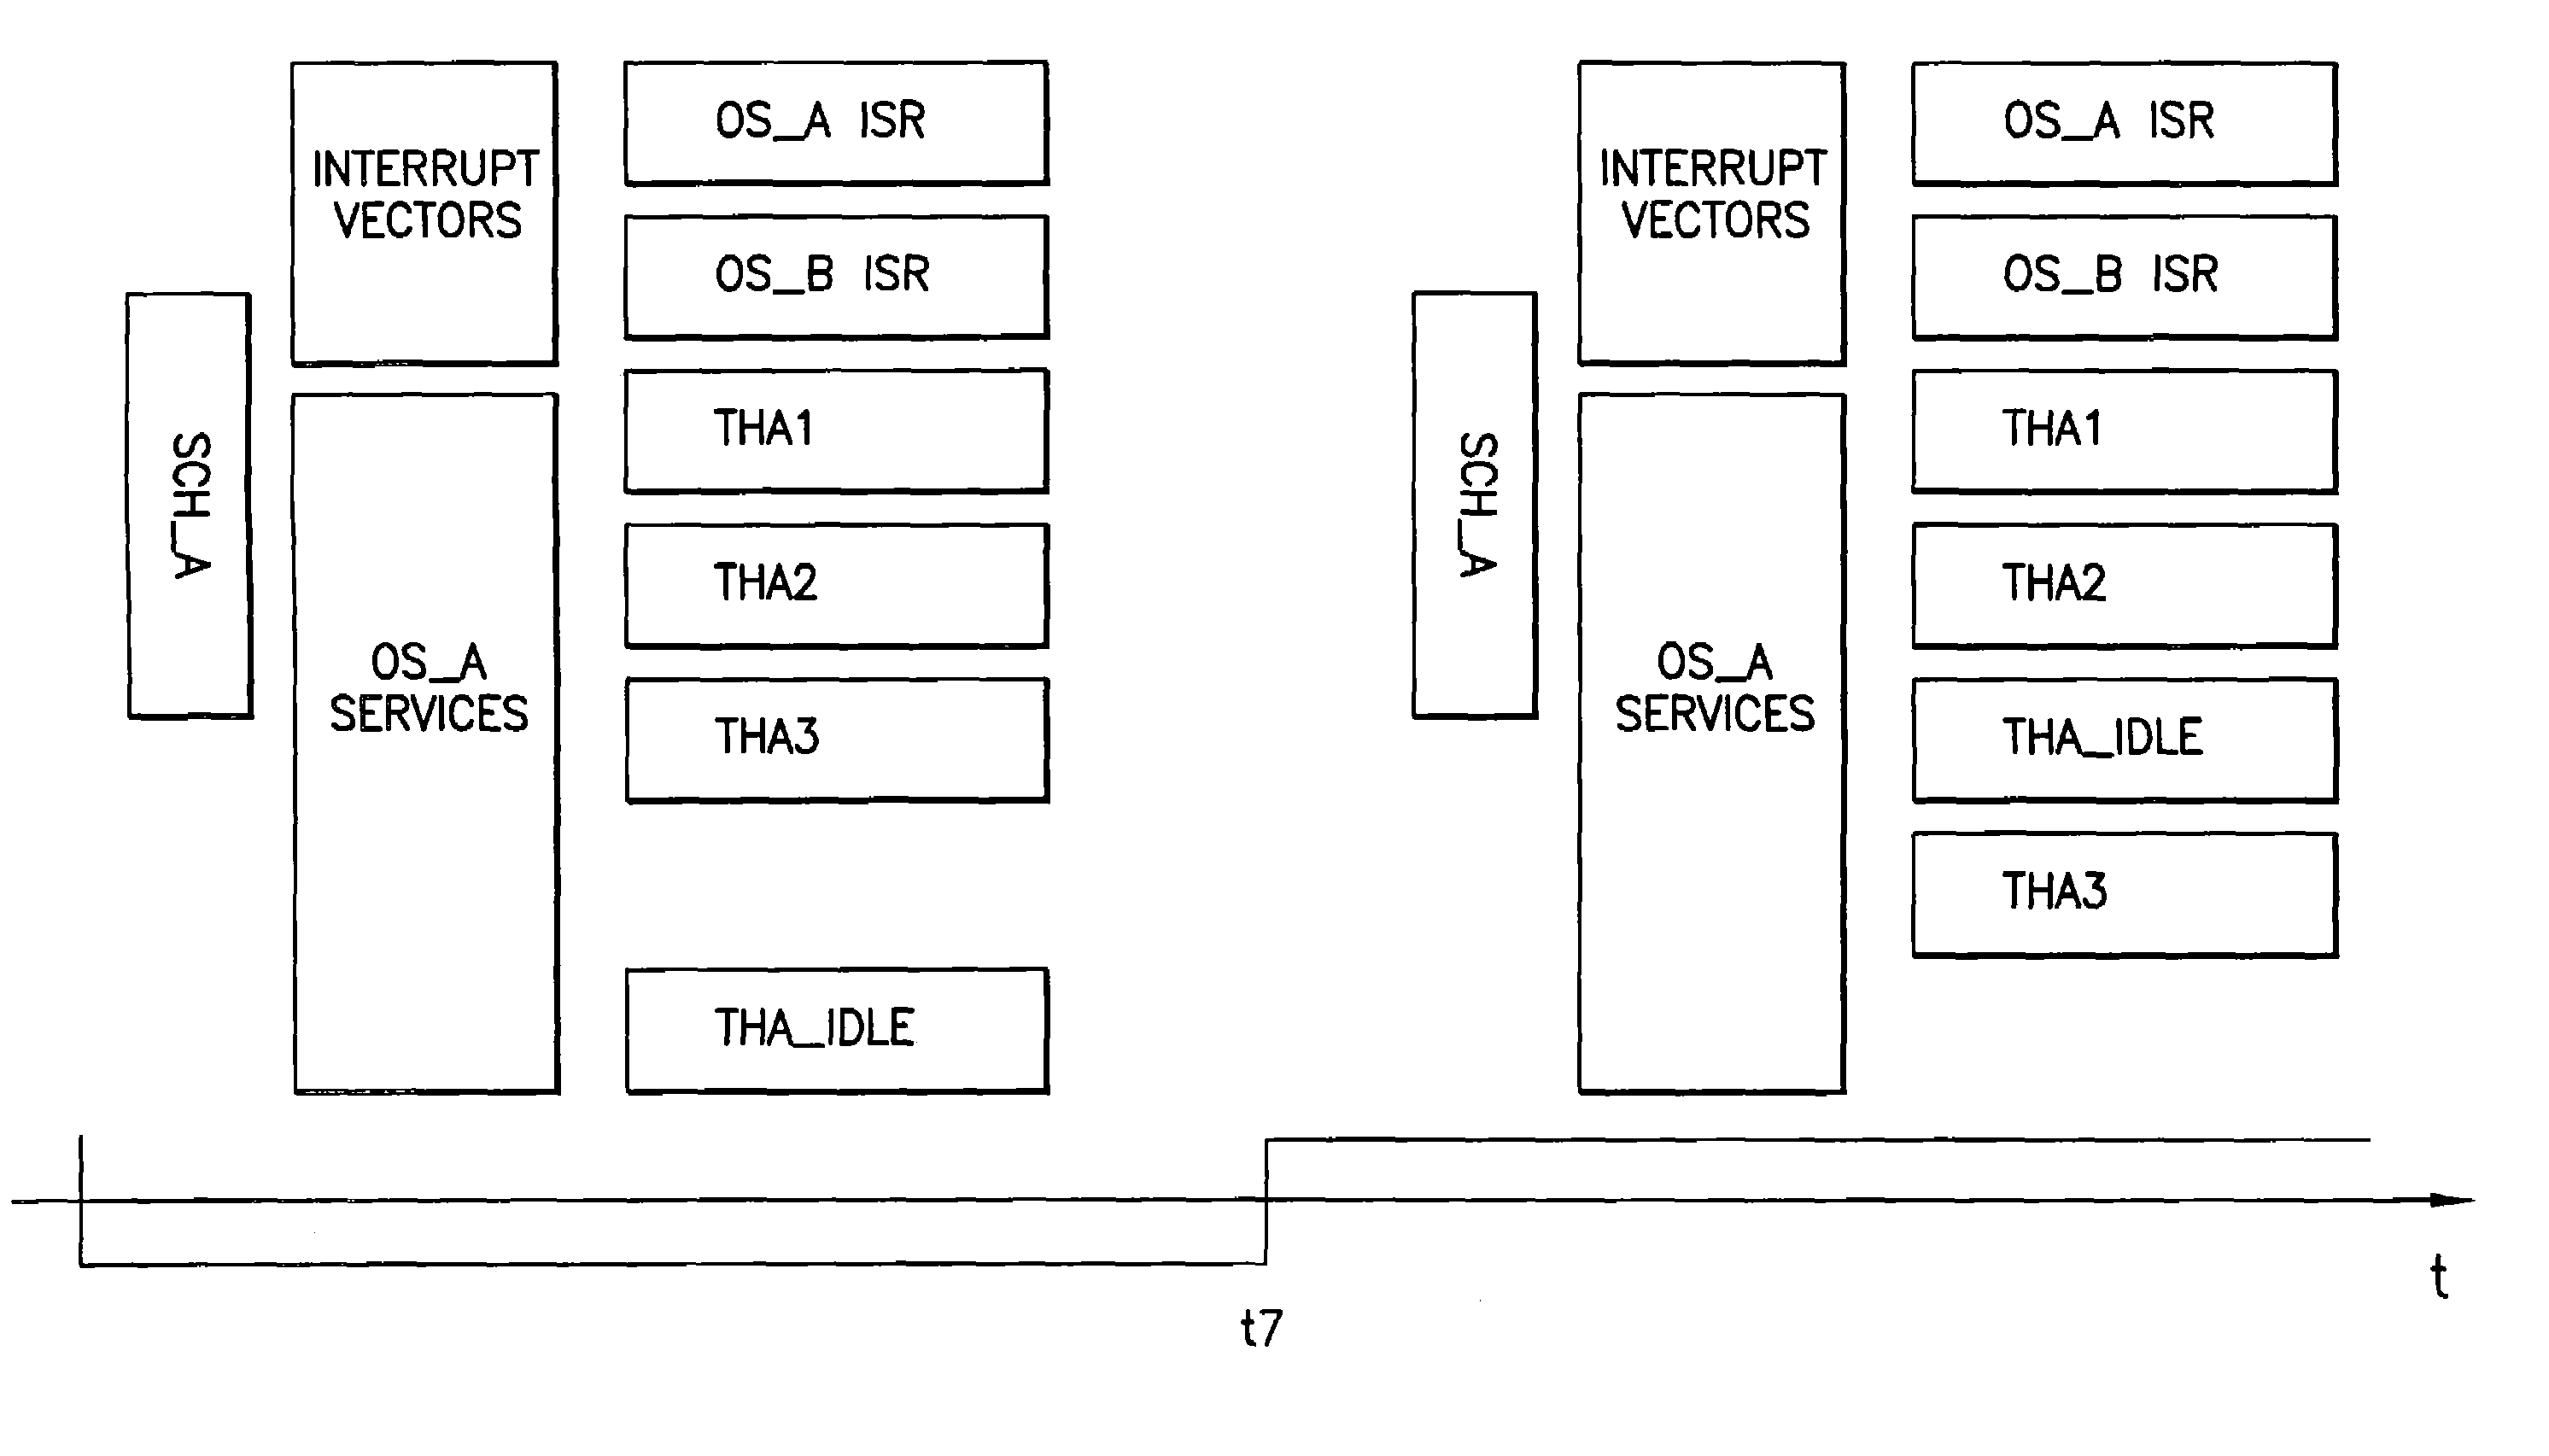 Embedded system with interrupt handler for multiple operating systems